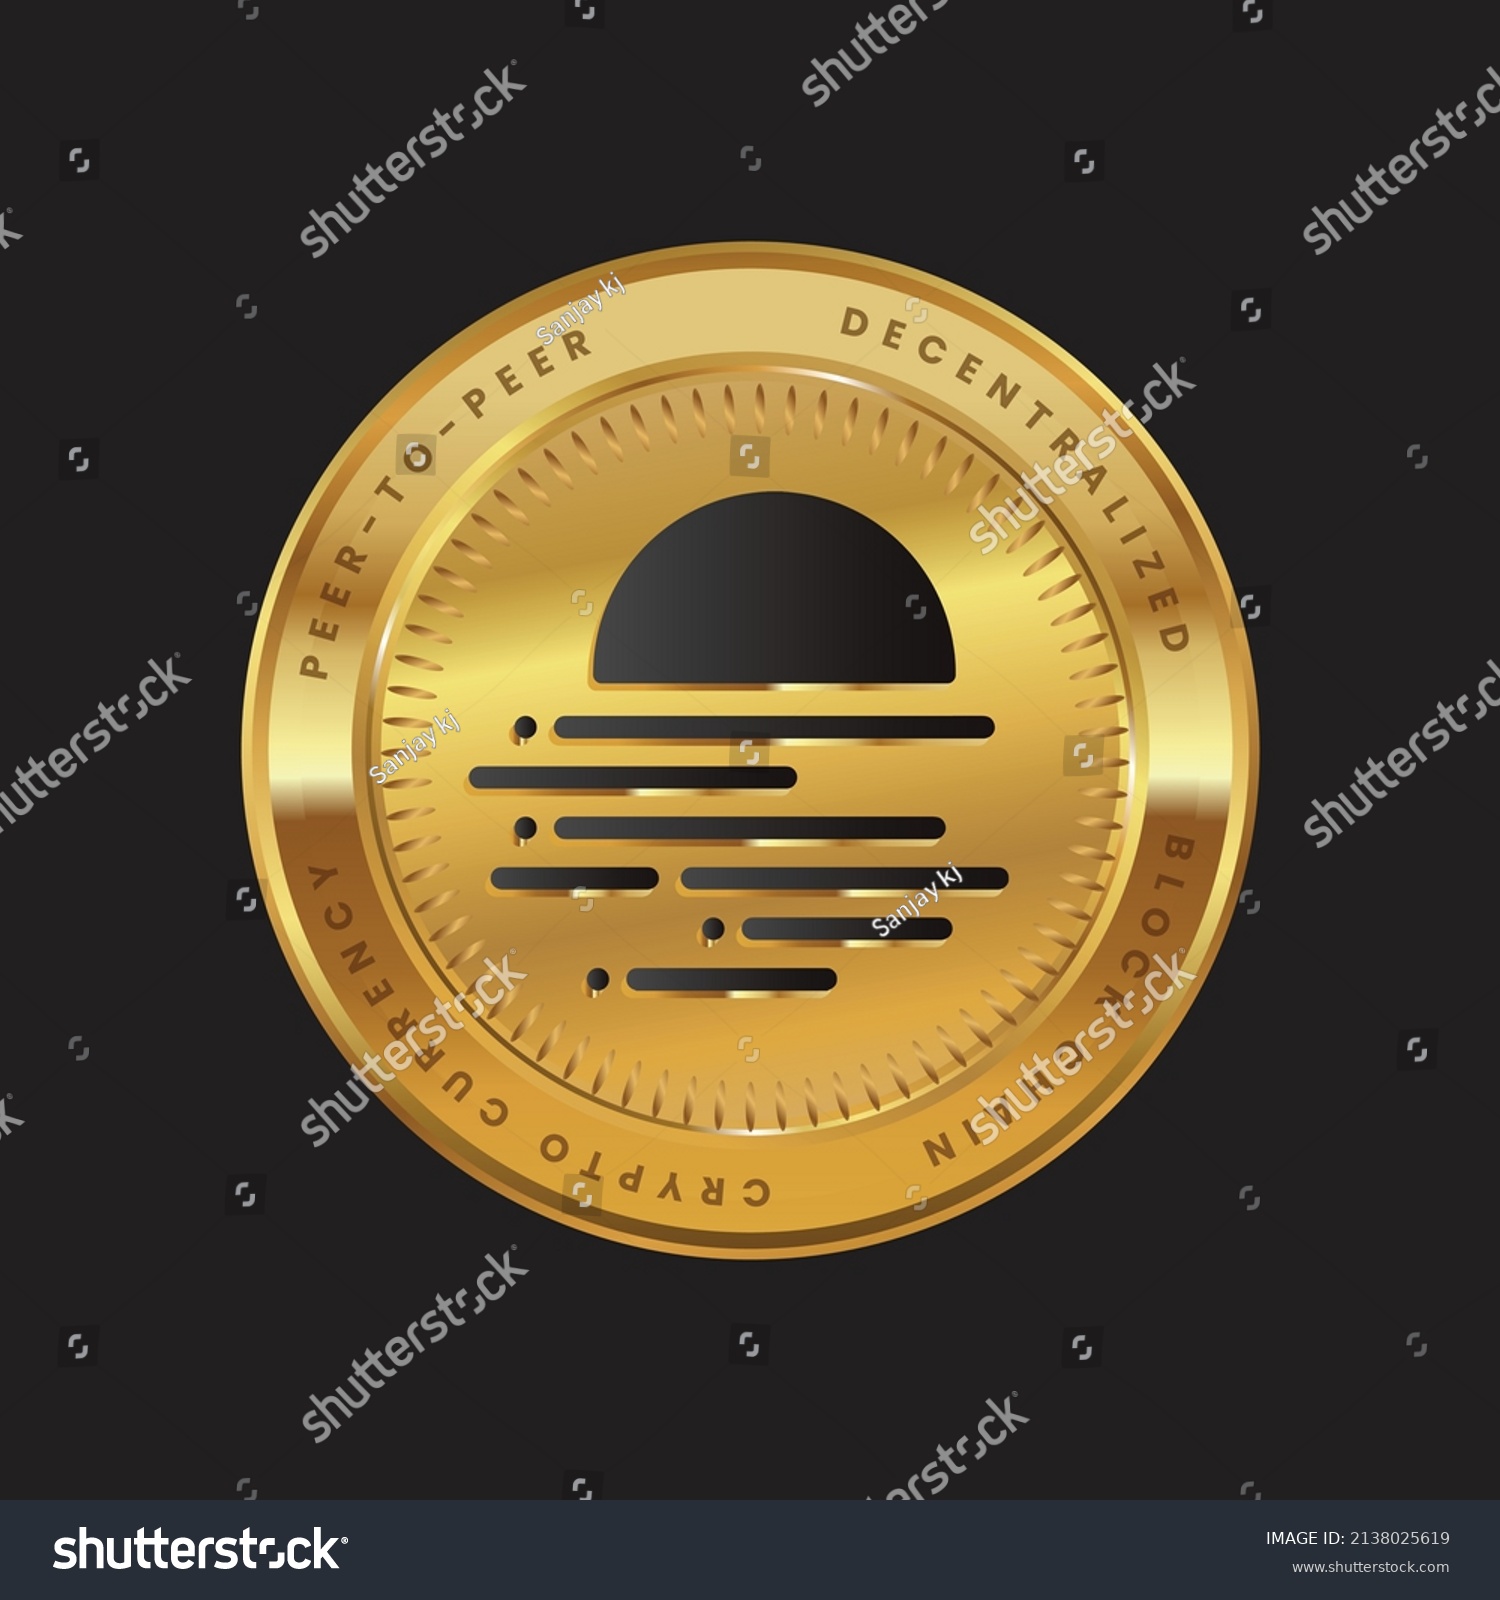 SVG of GLMR Cryptocurrency logo in black color concept on gold coin. Moonbeam Coin Block chain technology symbol. Vector illustration. svg